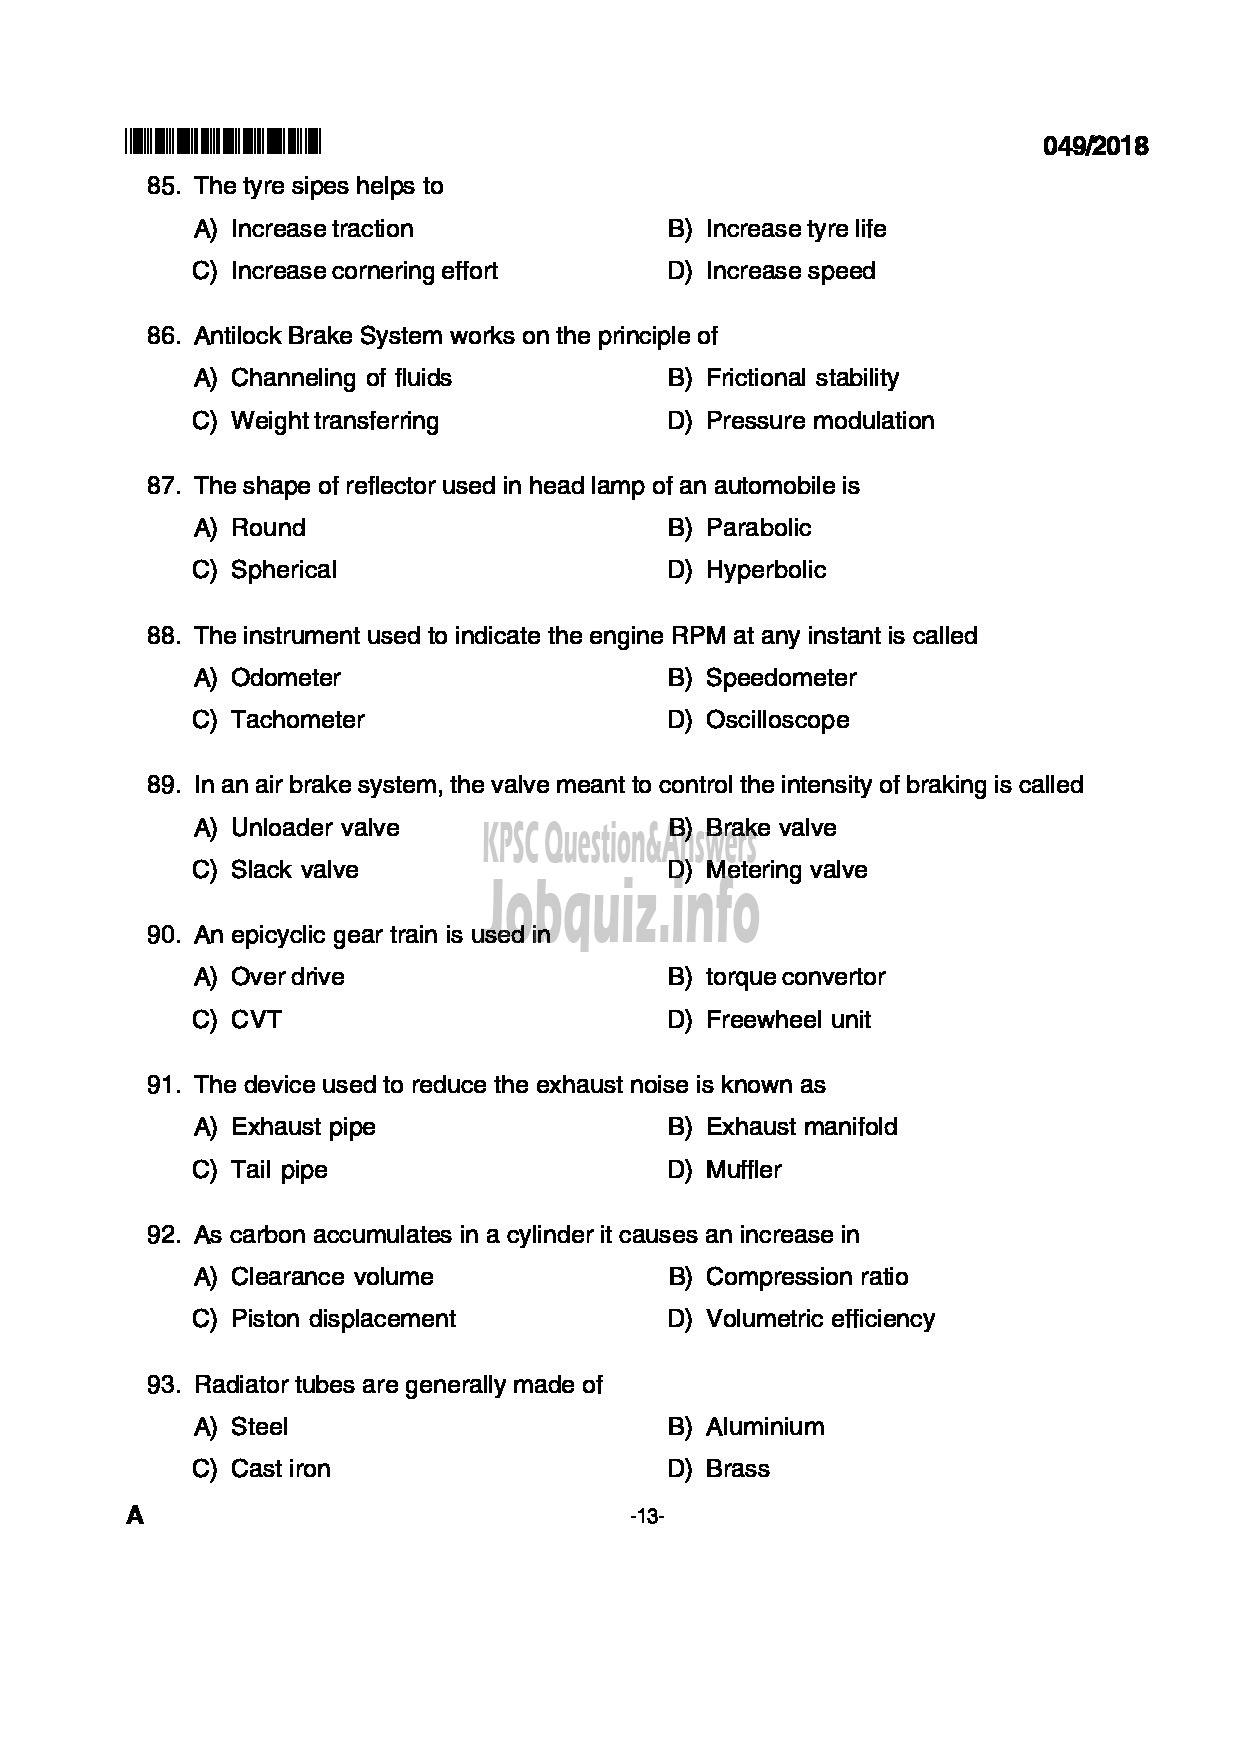 Kerala PSC Question Paper - VOCATIONAL INSTRUCTOR IN MAINTENANCE AND REPAIRS OF AUTOMOBILES VOCATIONAL HIGHER SECONDARY EDUCATION-13